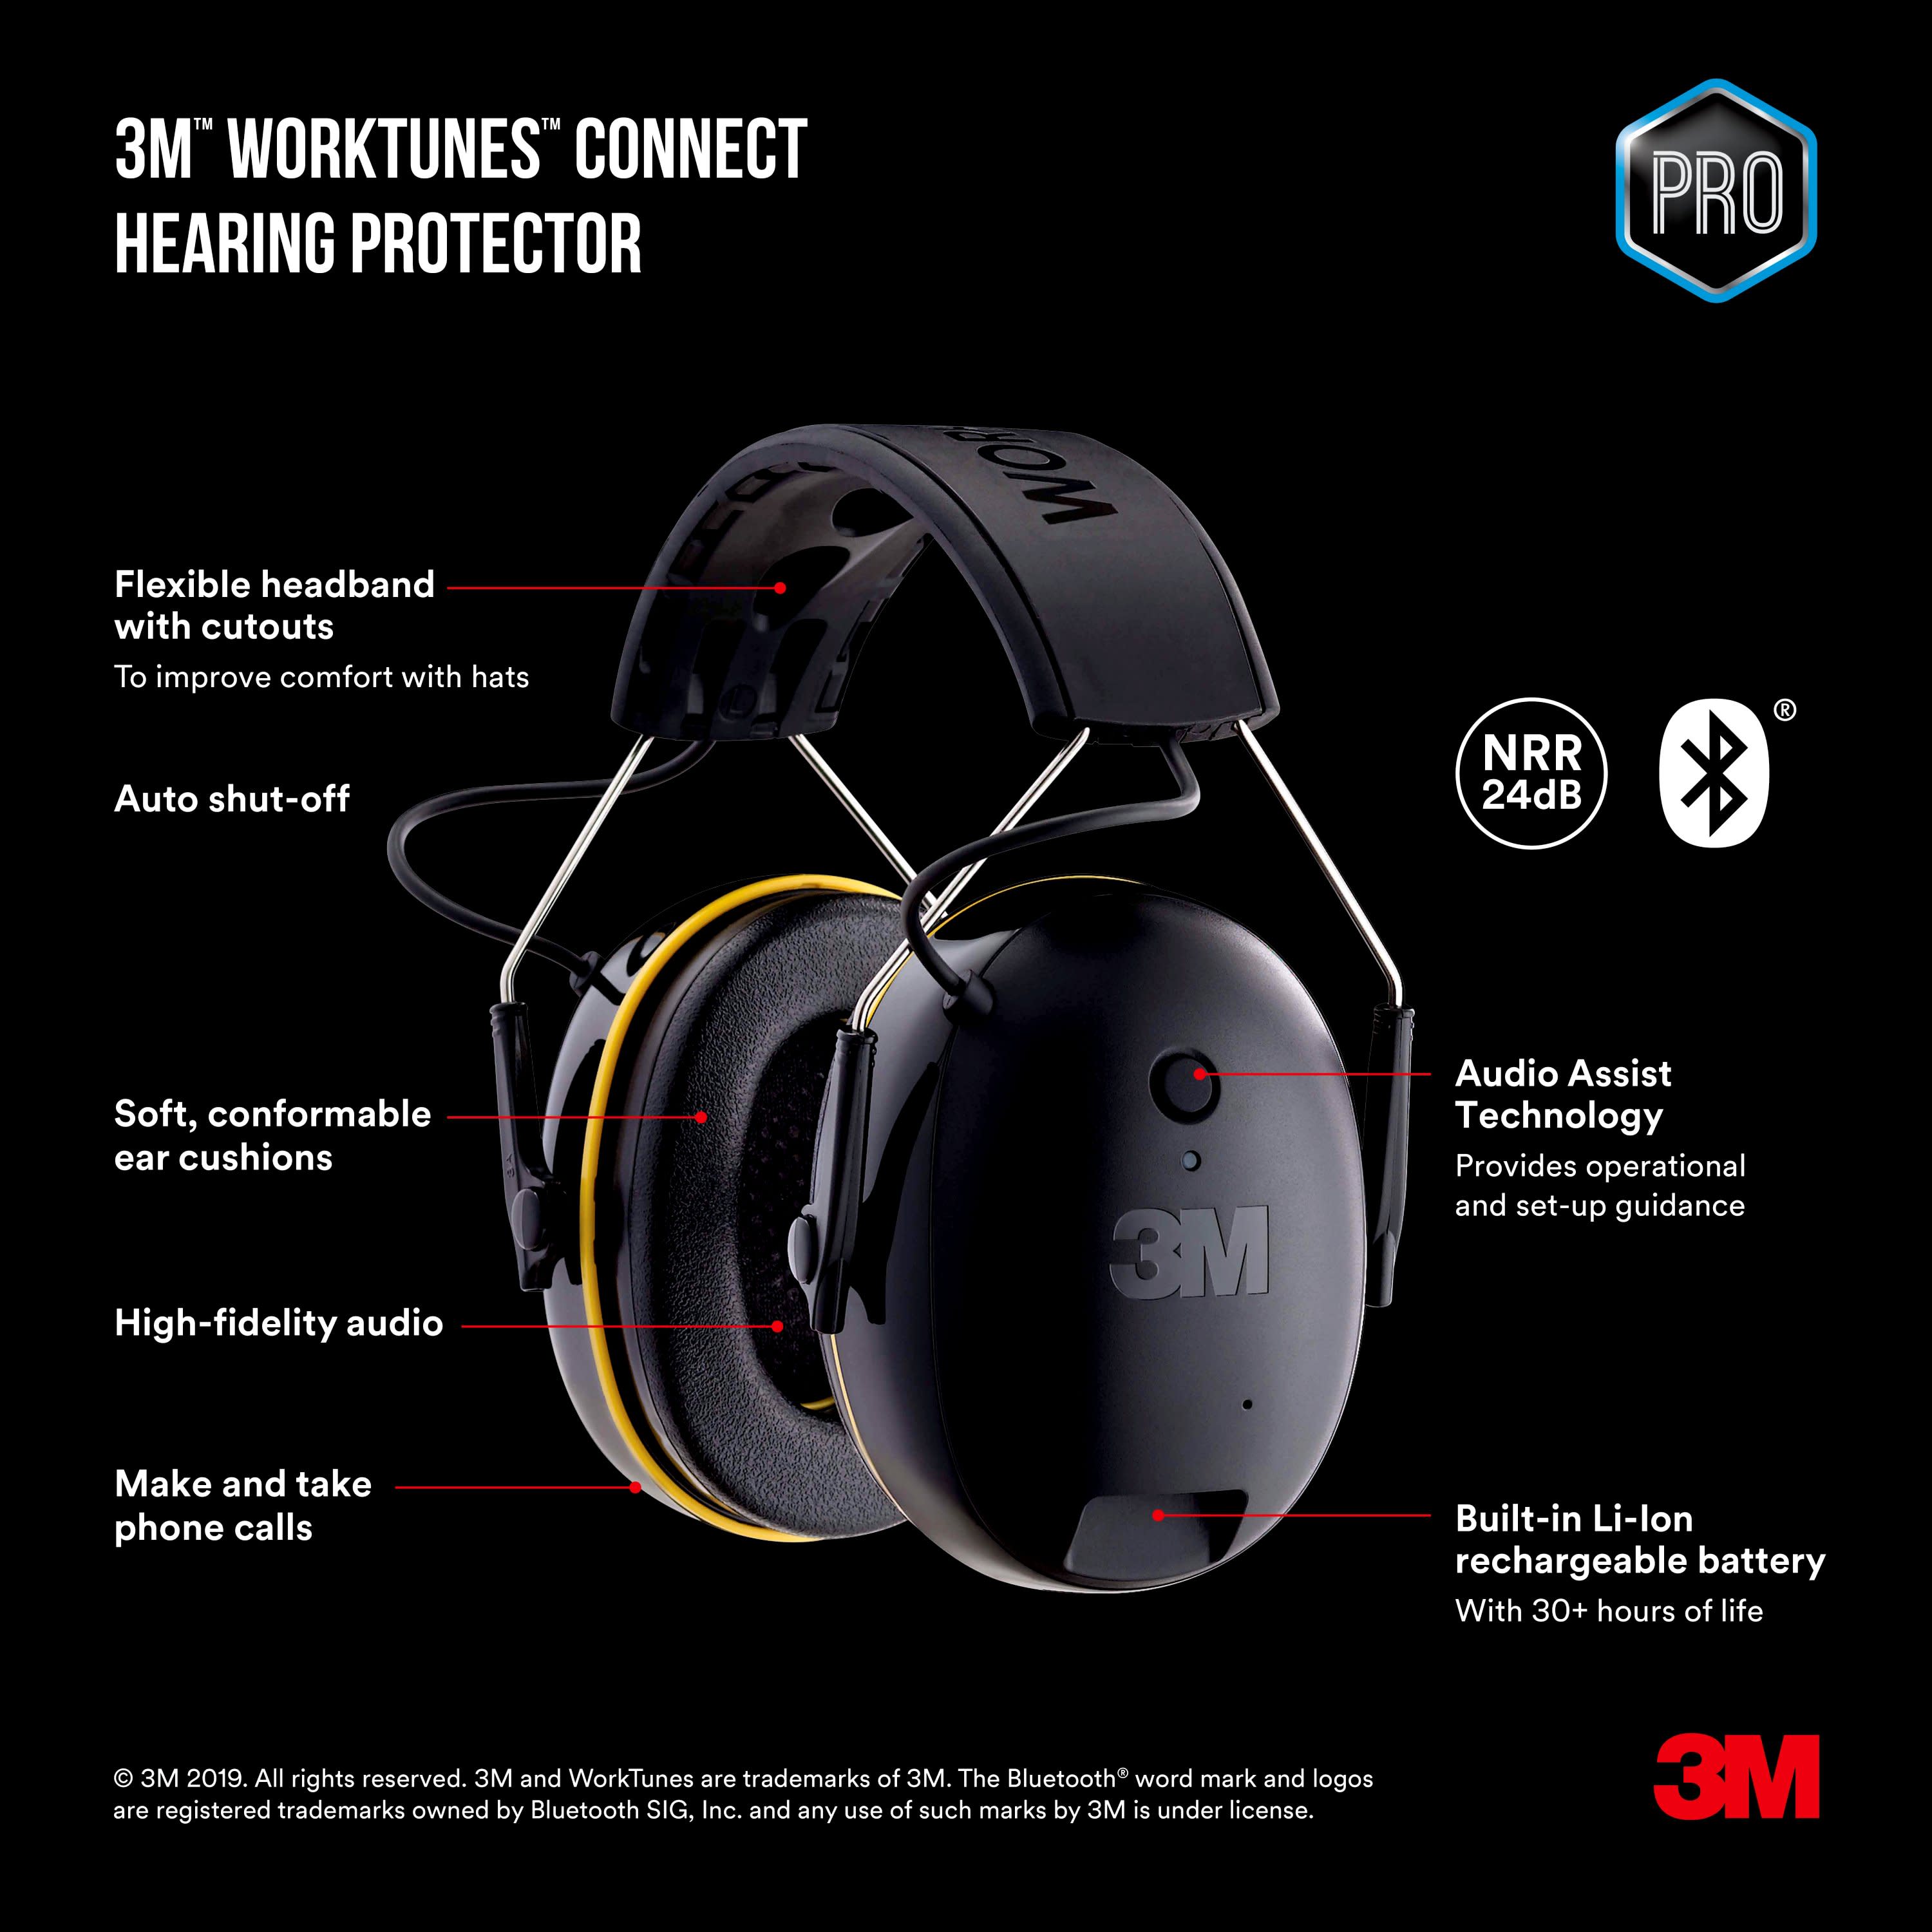 3M Safety Earmuffs Hearing Protector W Bluetooth Technology 24dB Noise Reduction 